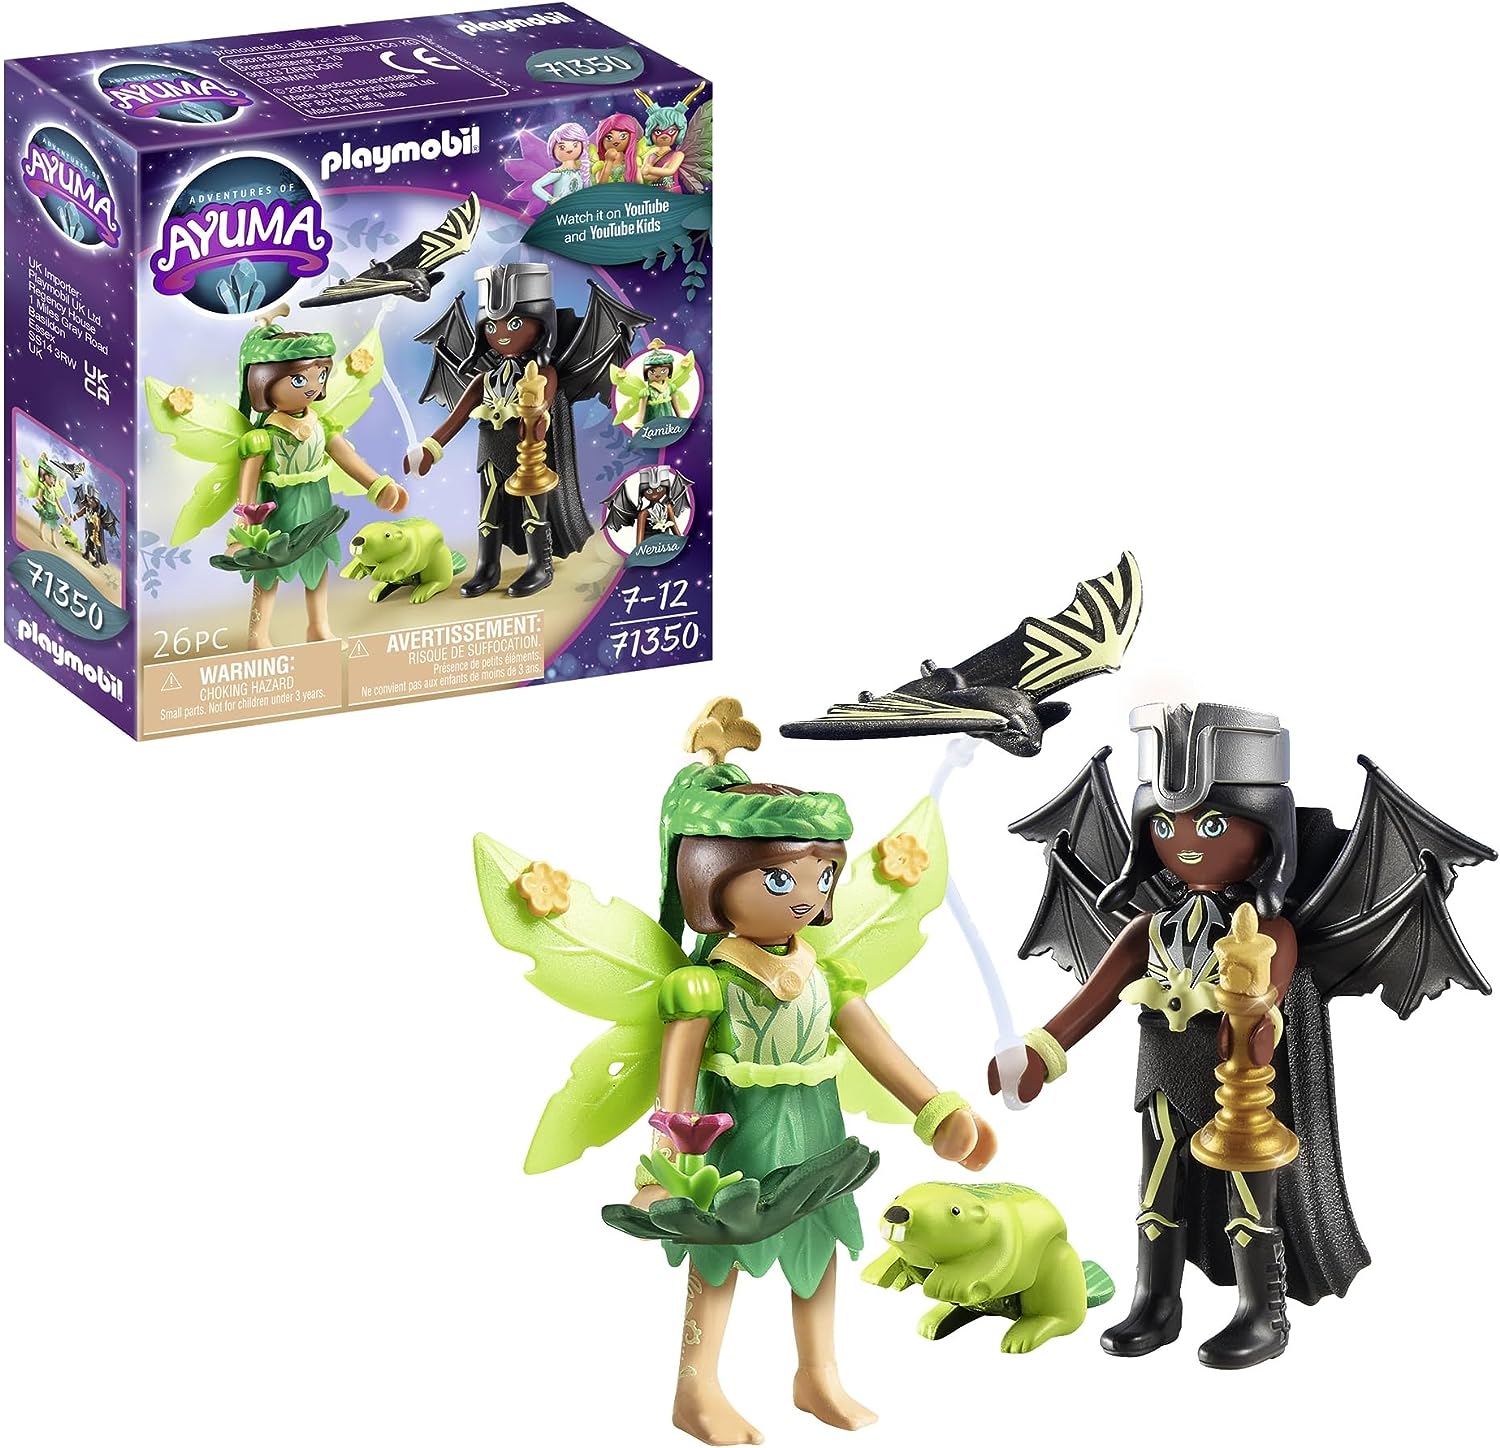 PLAYMOBIL Adventures of Ayuma 71350 Forest Fairy & Bat Fairy with Soul Animals, Fairy Friends with Their Soul Animals Beaver and Bat, Toy for Children from 7 Years